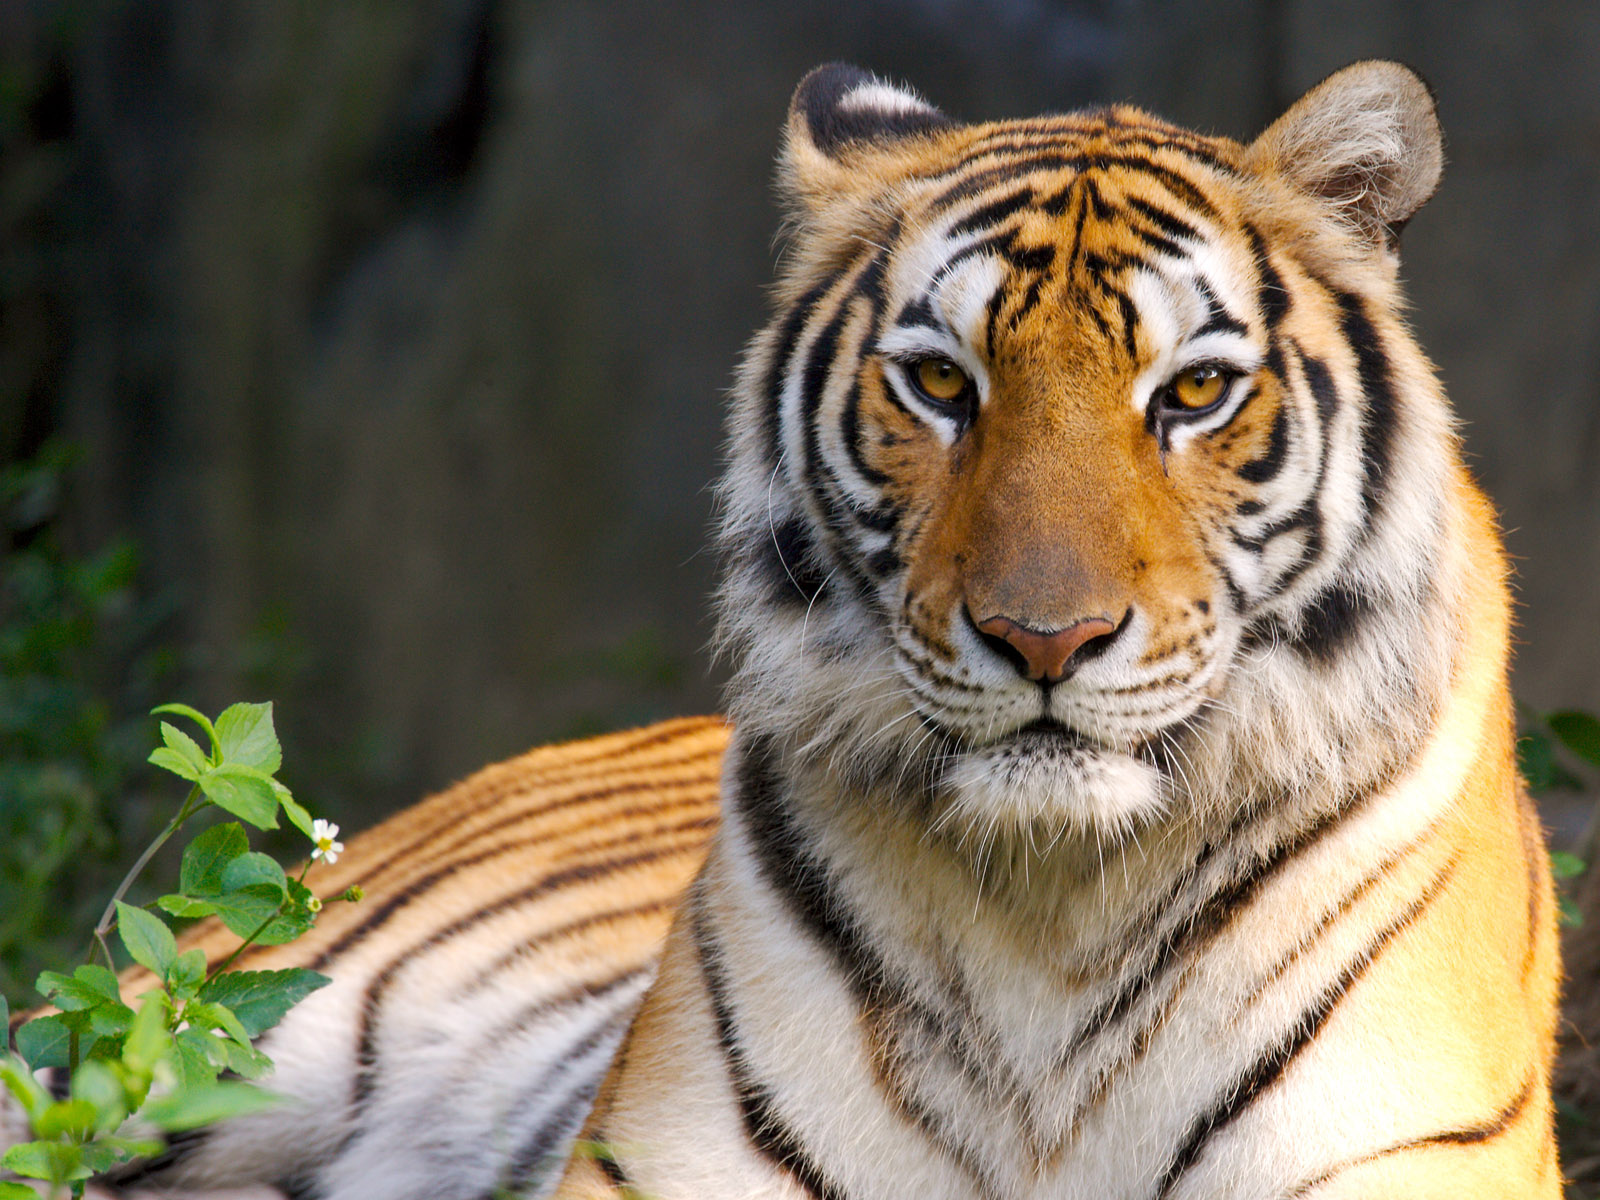 Tiger New HD Wallpaper For Your Laptop Screen Wallapers